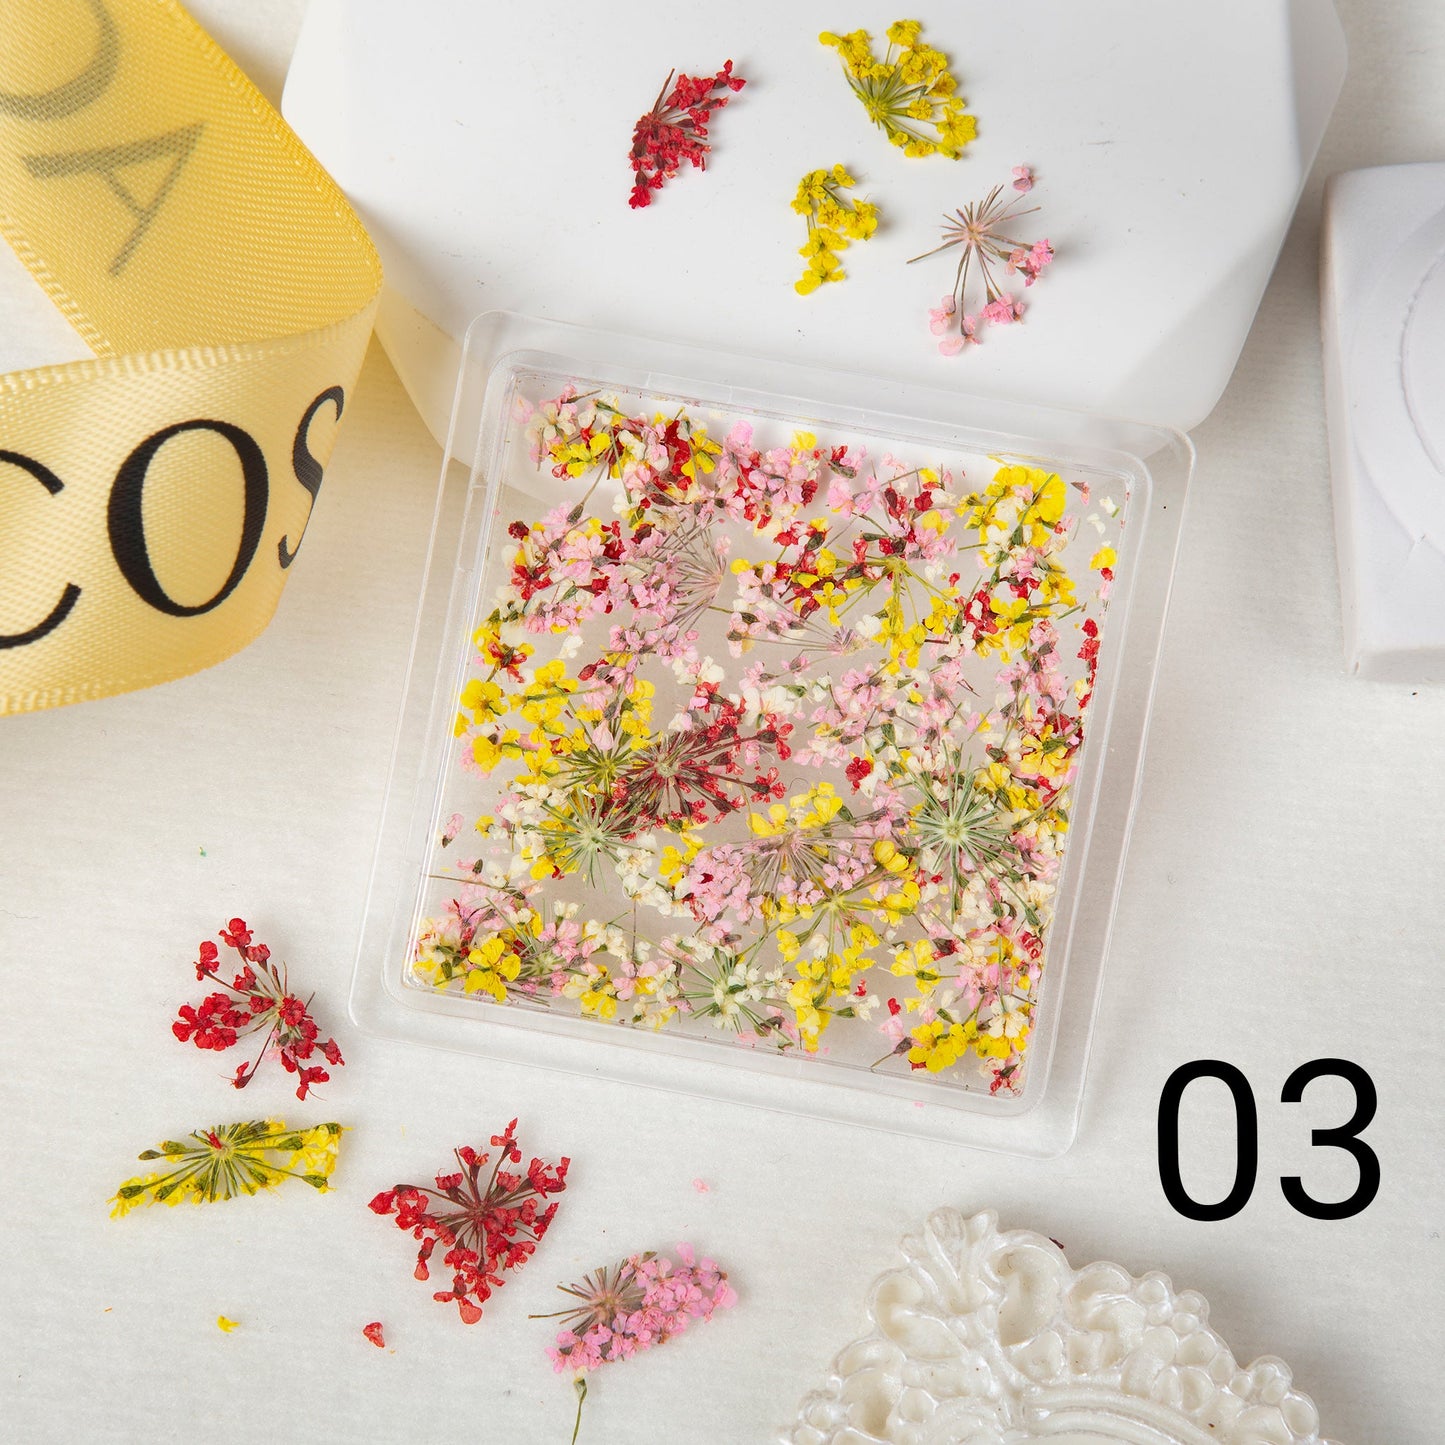 ACOS Dried Flowers Nail Art Decoration